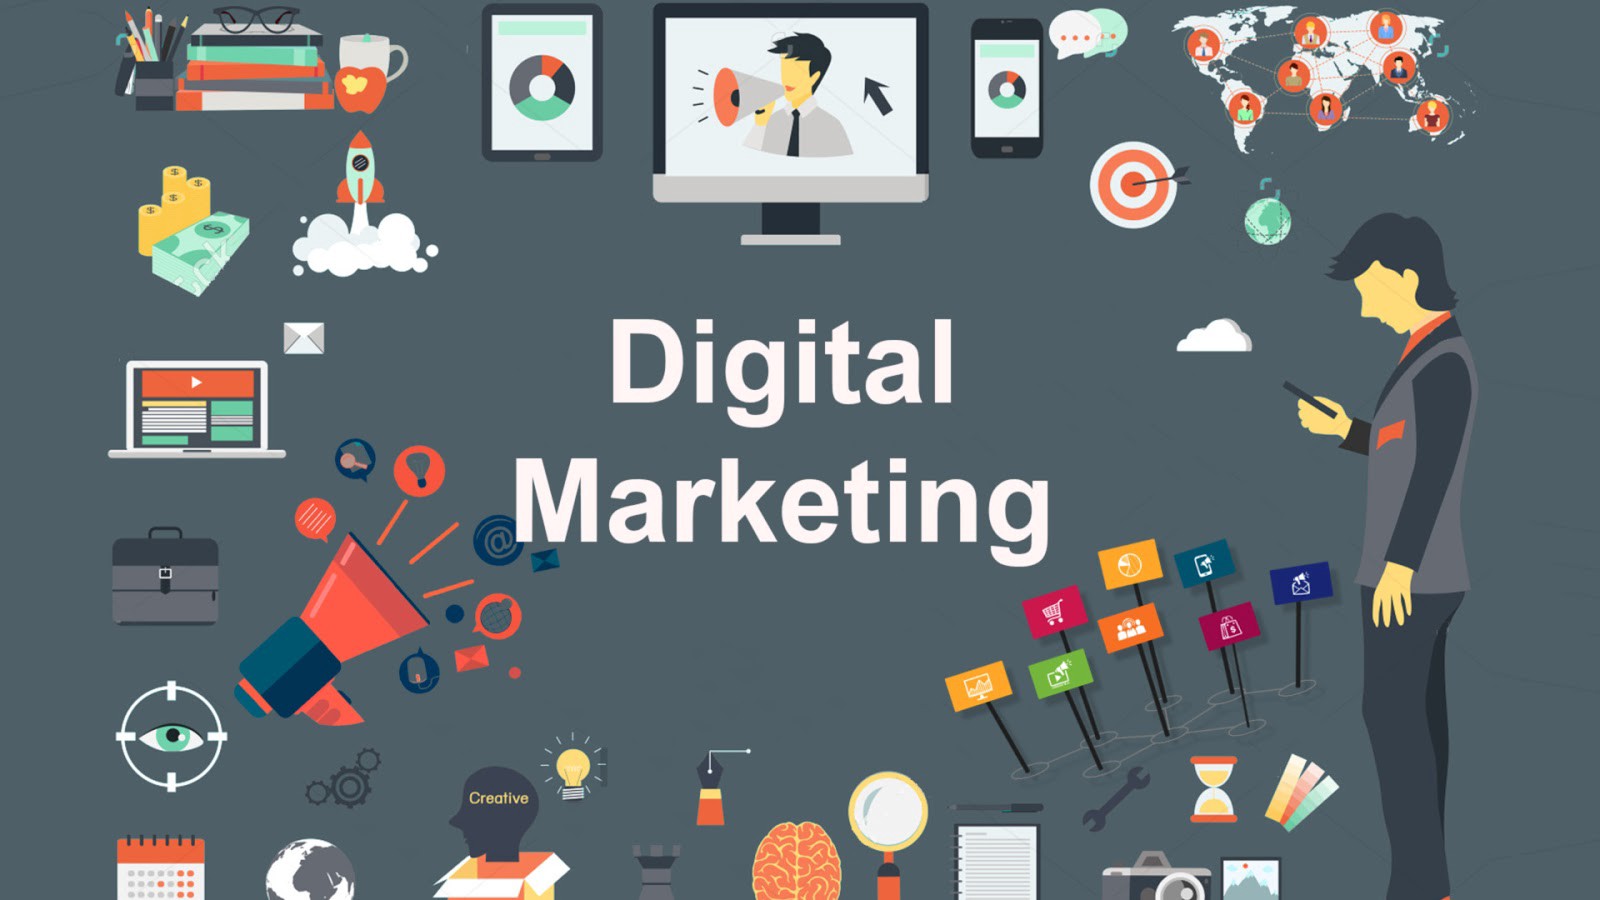 Is Digital Marketing Only For Corporate Companies